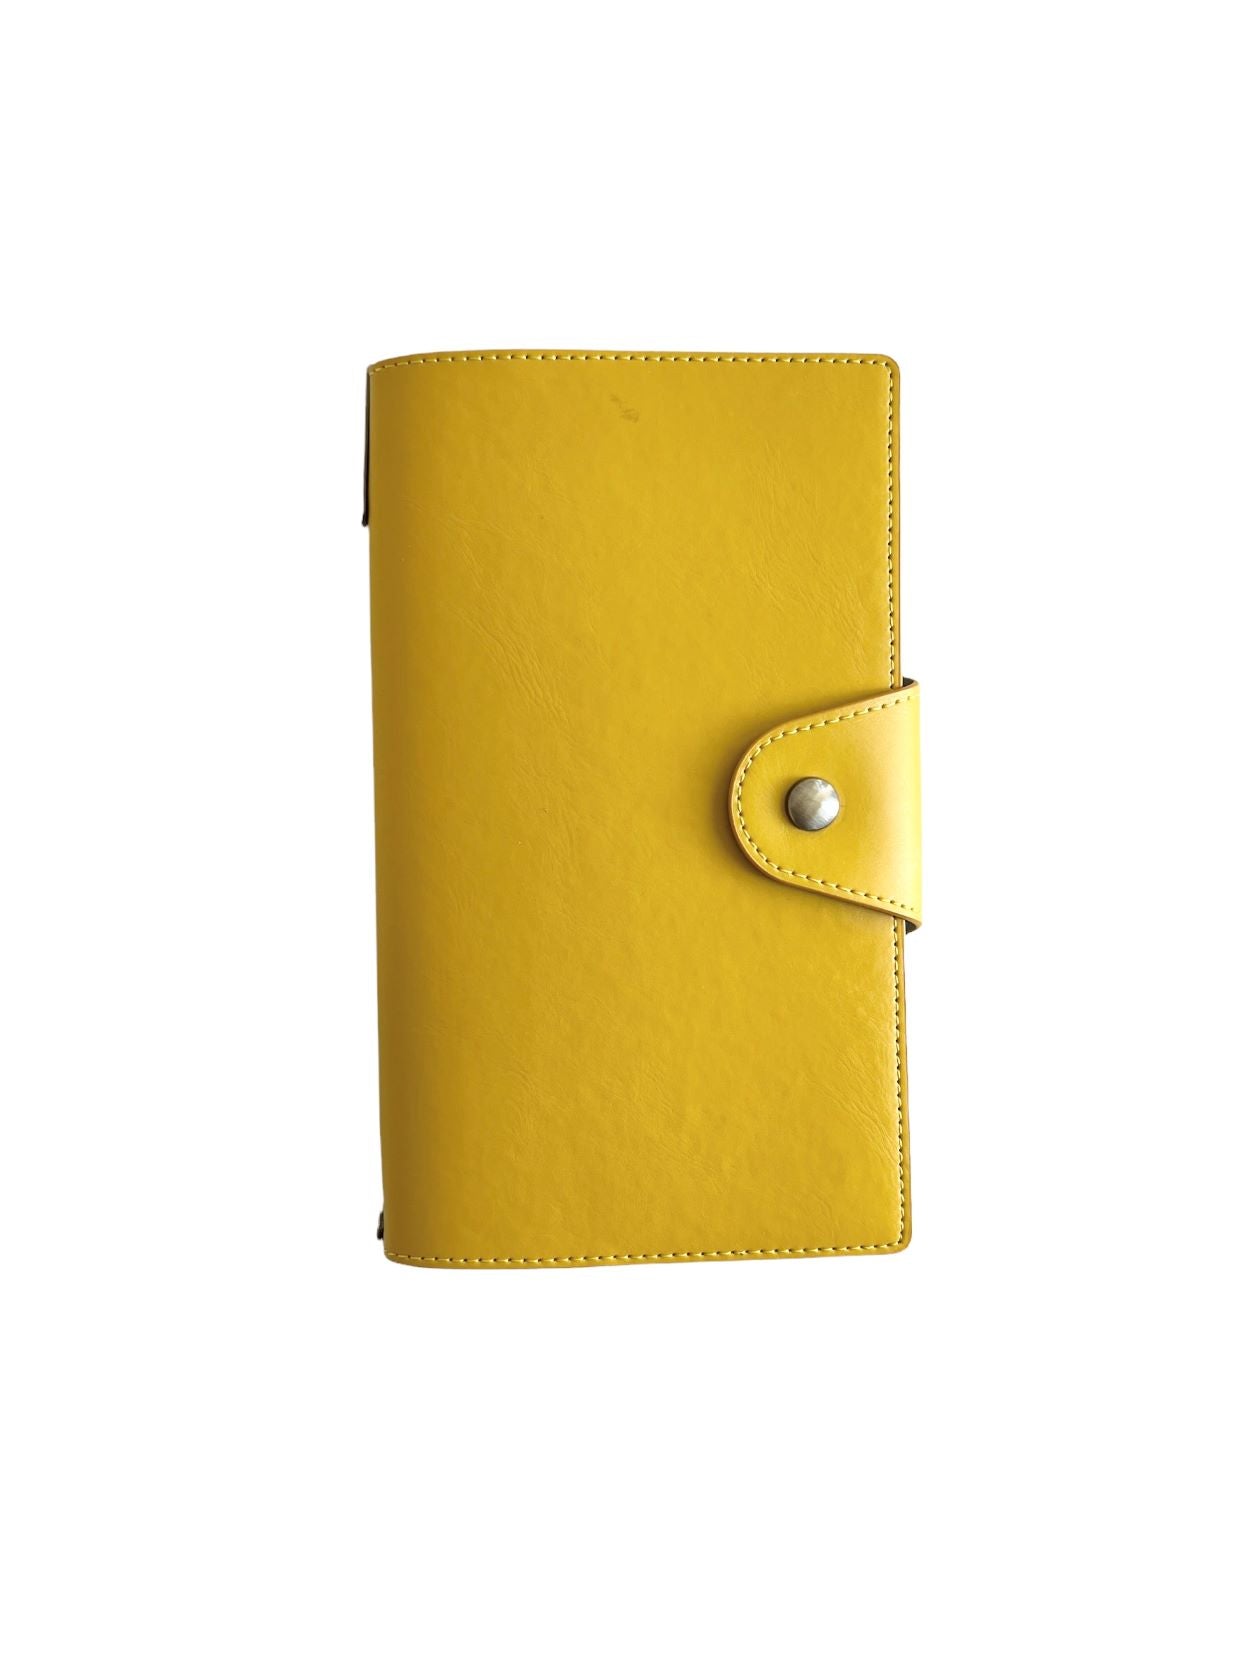 Sunshine yellow travel folio with flap and button closure, portable, interior has card slots and 2 travel notebooks